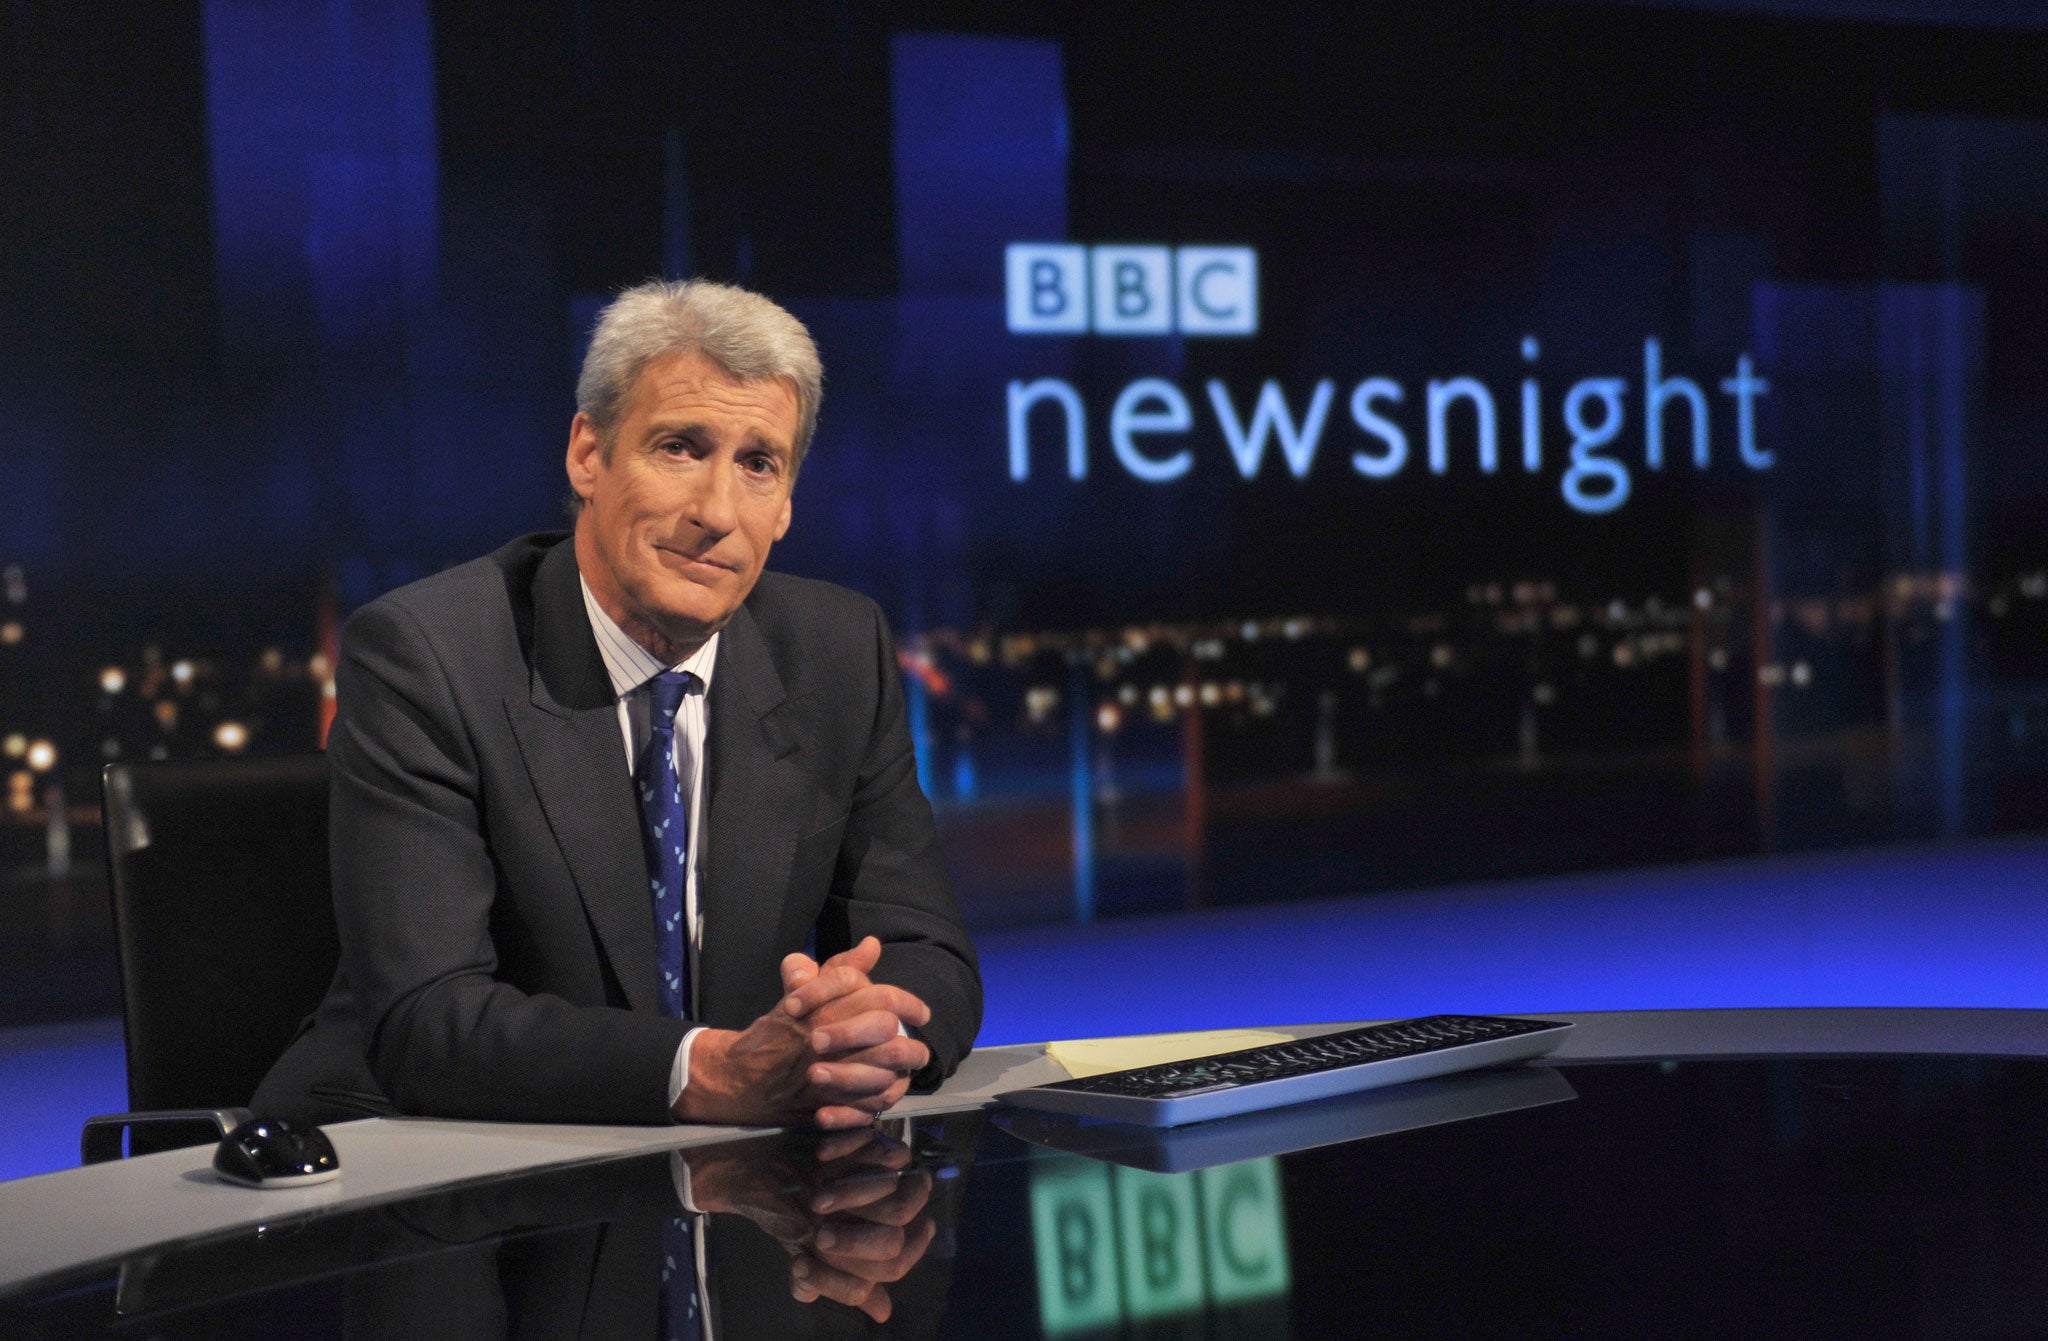 Jeremy Paxman: 'There were several bad decisions'